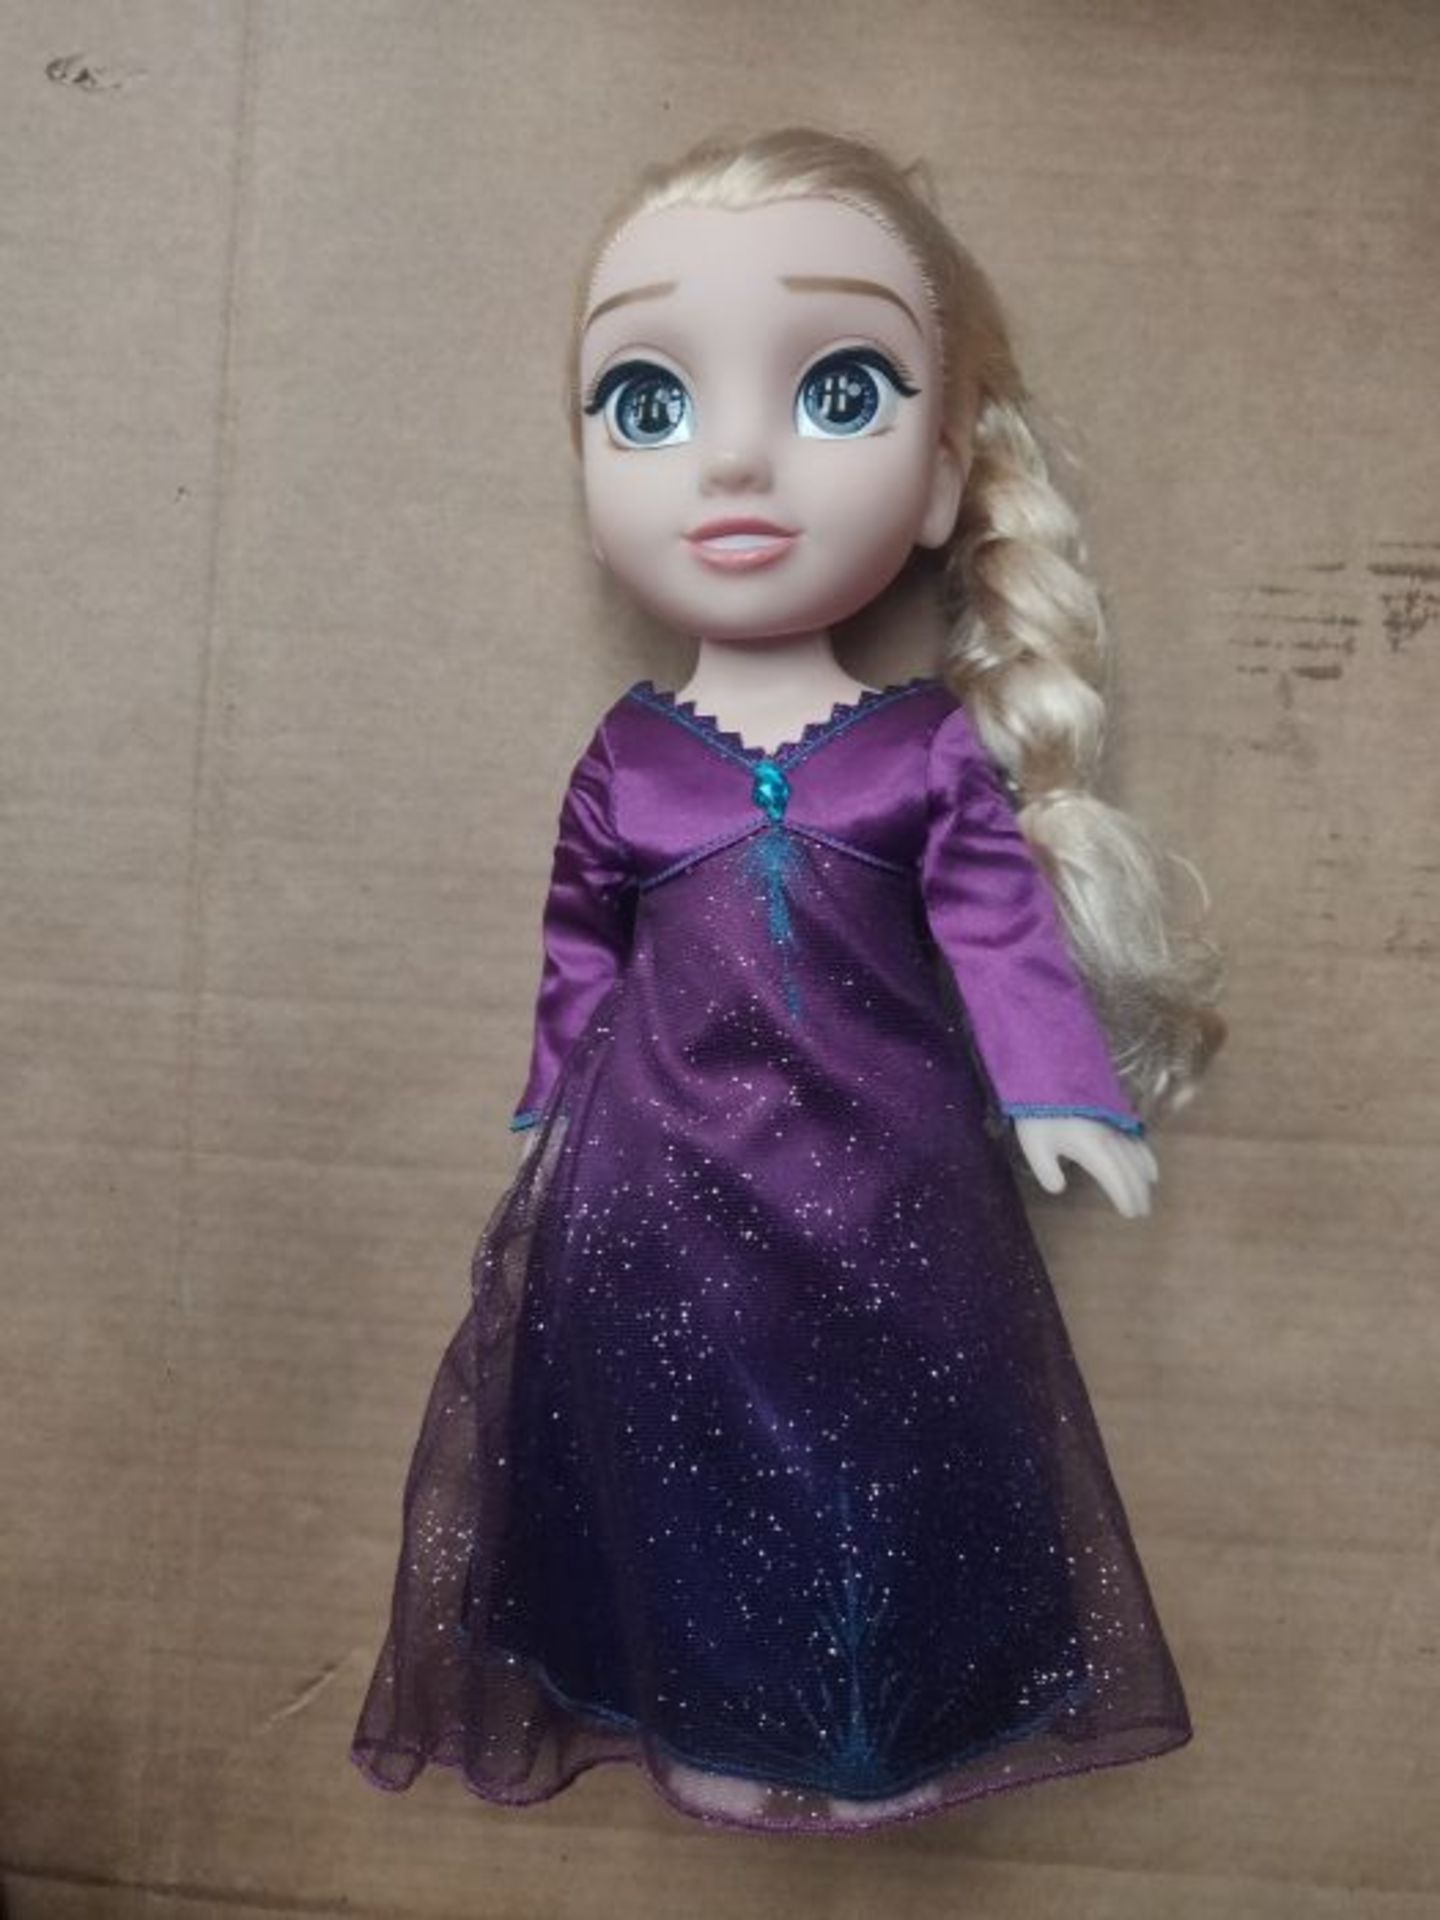 Frozen 2 207474 Disney Elsa Musical Doll Sings Into The Unknown Fashion, Ages 3+ - Image 3 of 3